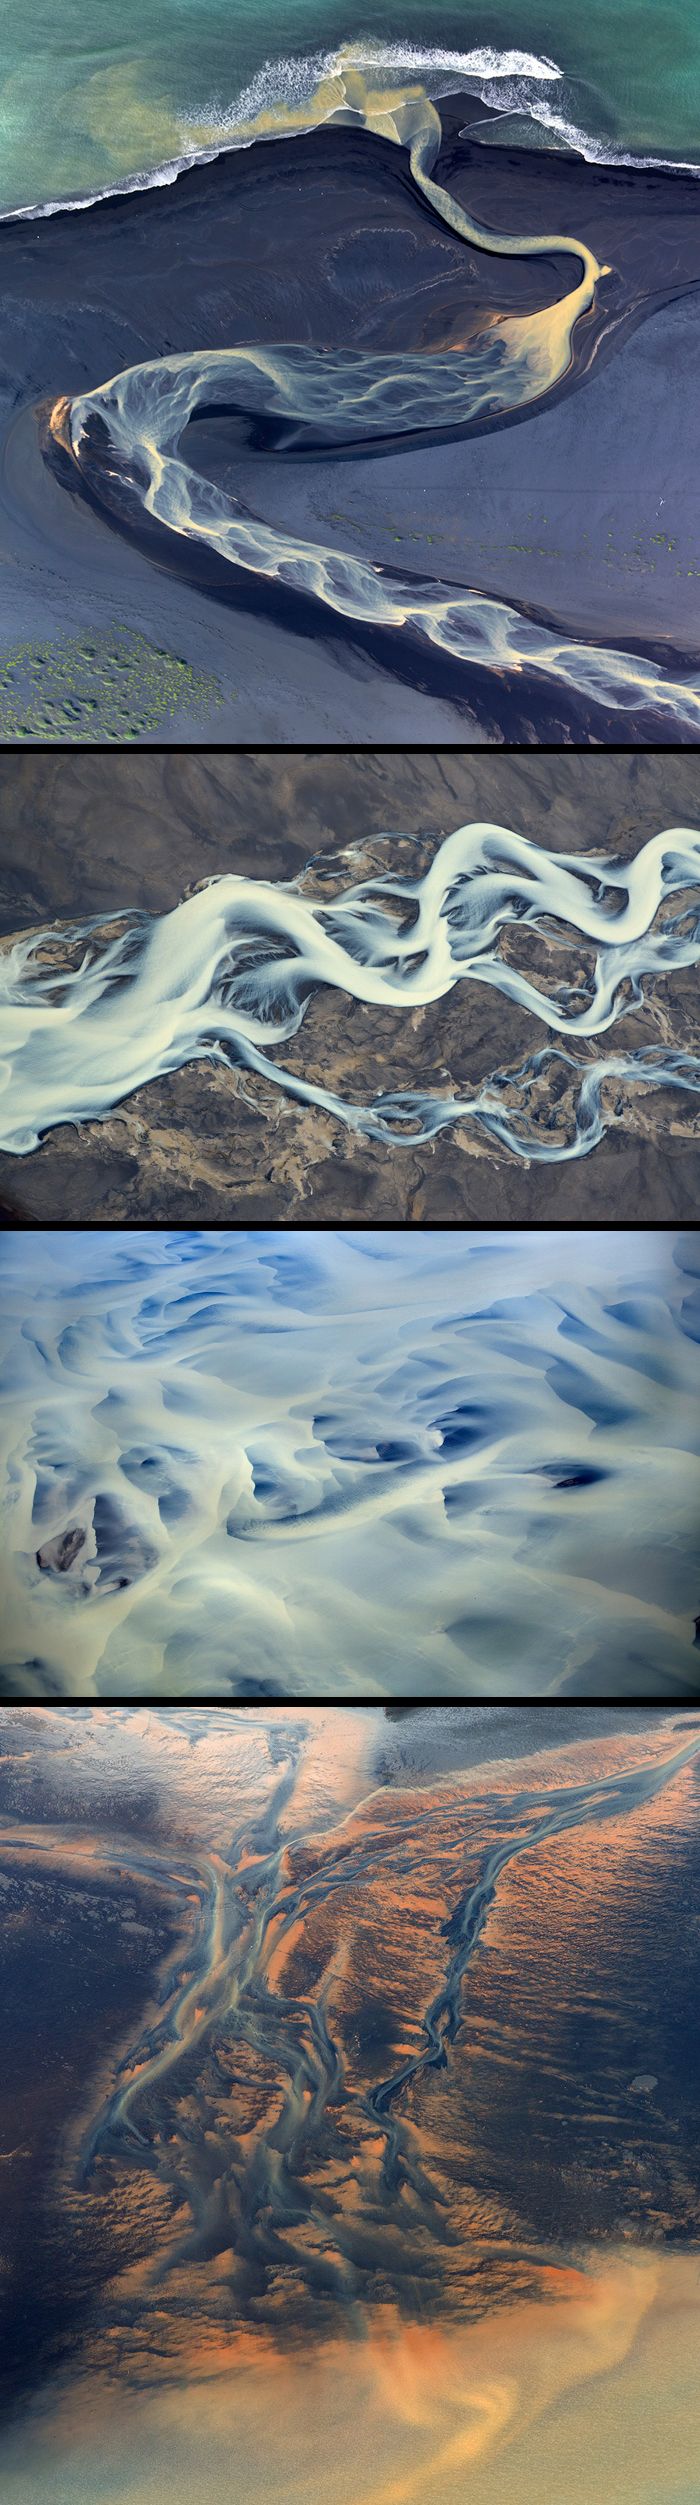 Photography of Iceland's volcanic rivers by Andre Ermolaev